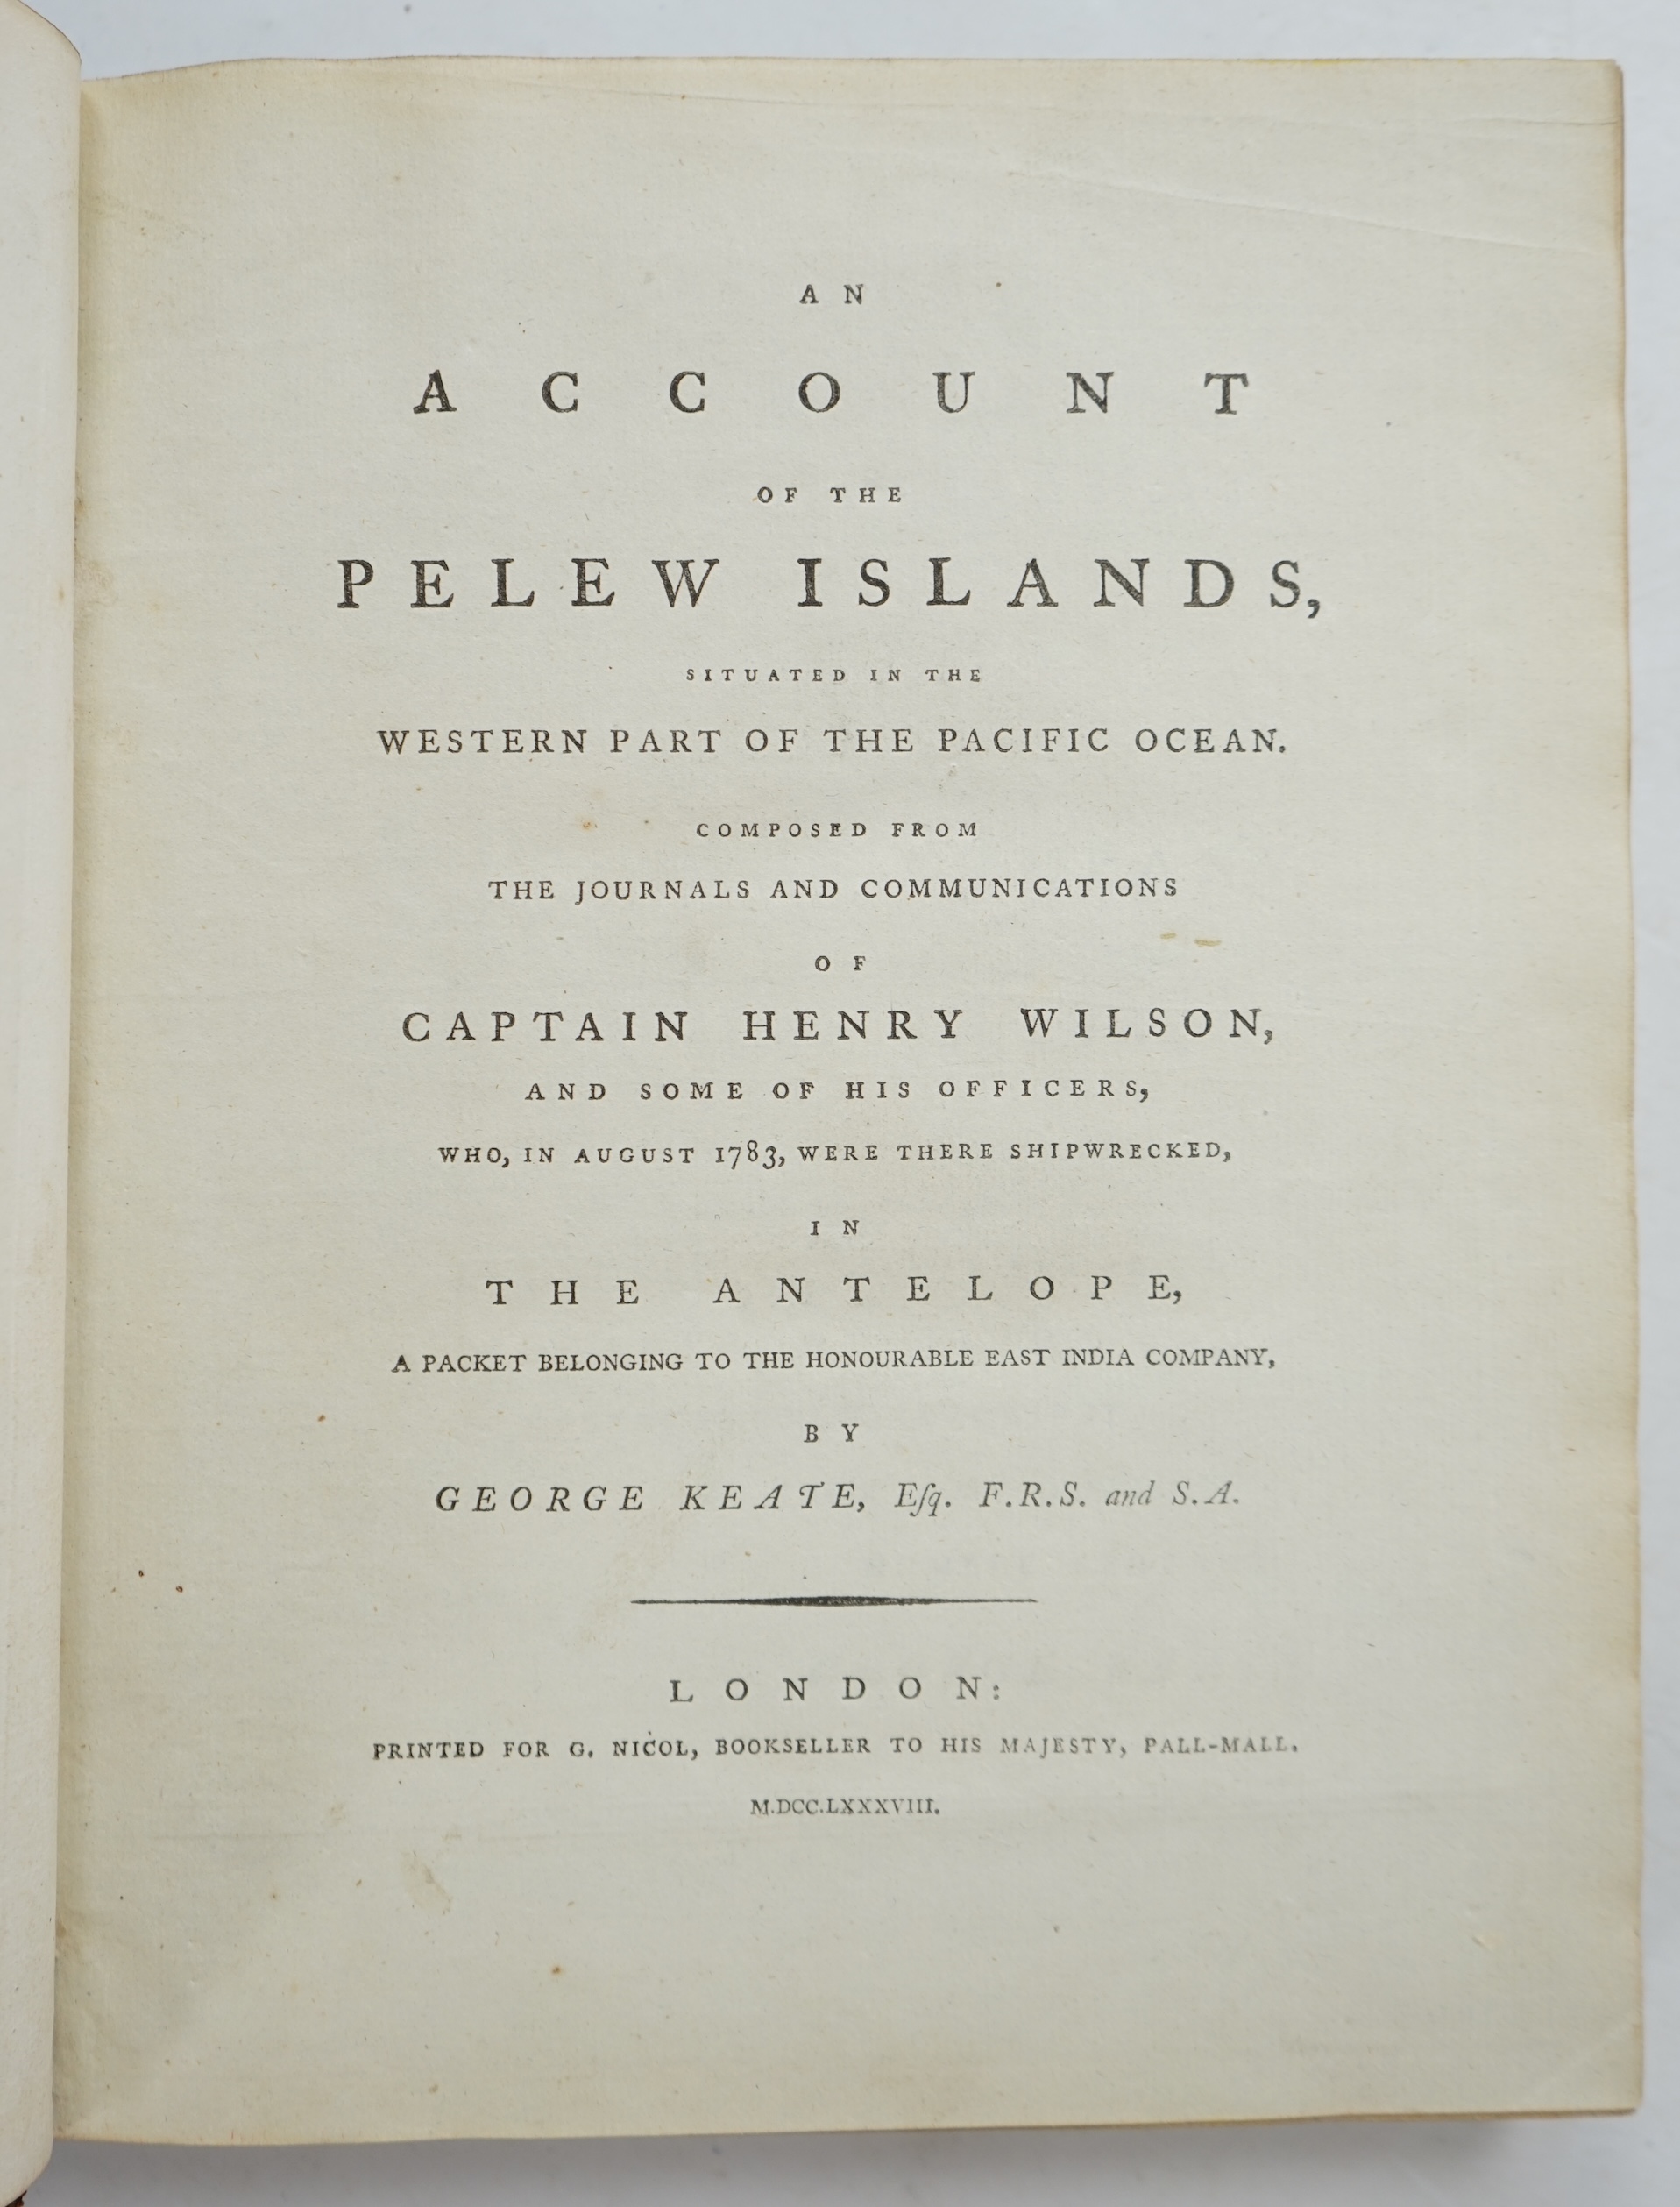 Keate, George - An Account of the Pelew Islands... composed from the Journals and Communications of Captain Henry Wilson, 1st edition, stipple-engraved portrait frontispiece, folding engraved map, 15 engraved plates (som